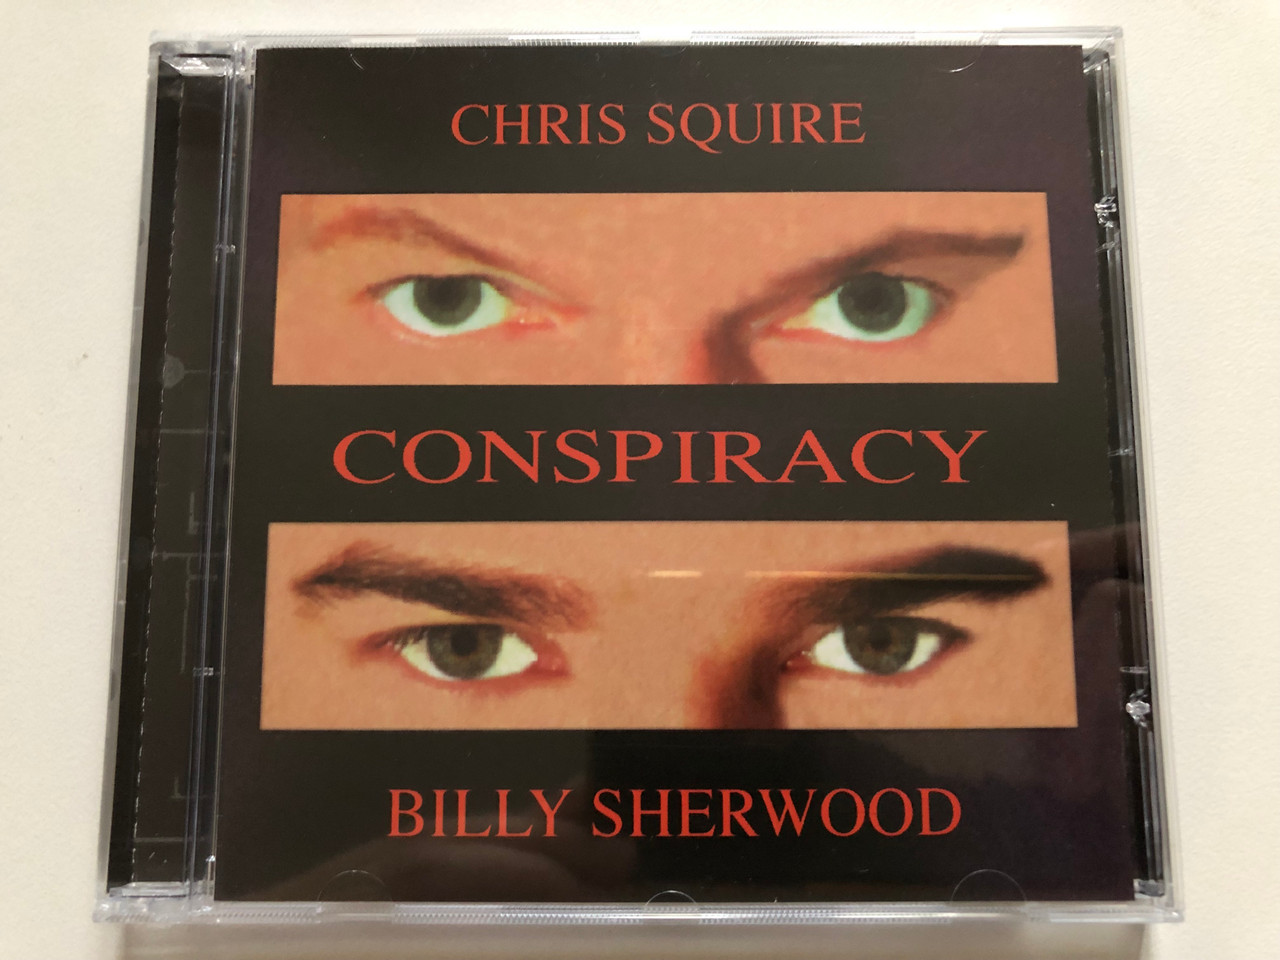 https://cdn10.bigcommerce.com/s-62bdpkt7pb/products/0/images/306412/Chris_Squire_Billy_Sherwood_Conspiracy_Eagle_Records_Audio_CD_2000_EAGCD126_1__80456.1698249589.1280.1280.JPG?c=2